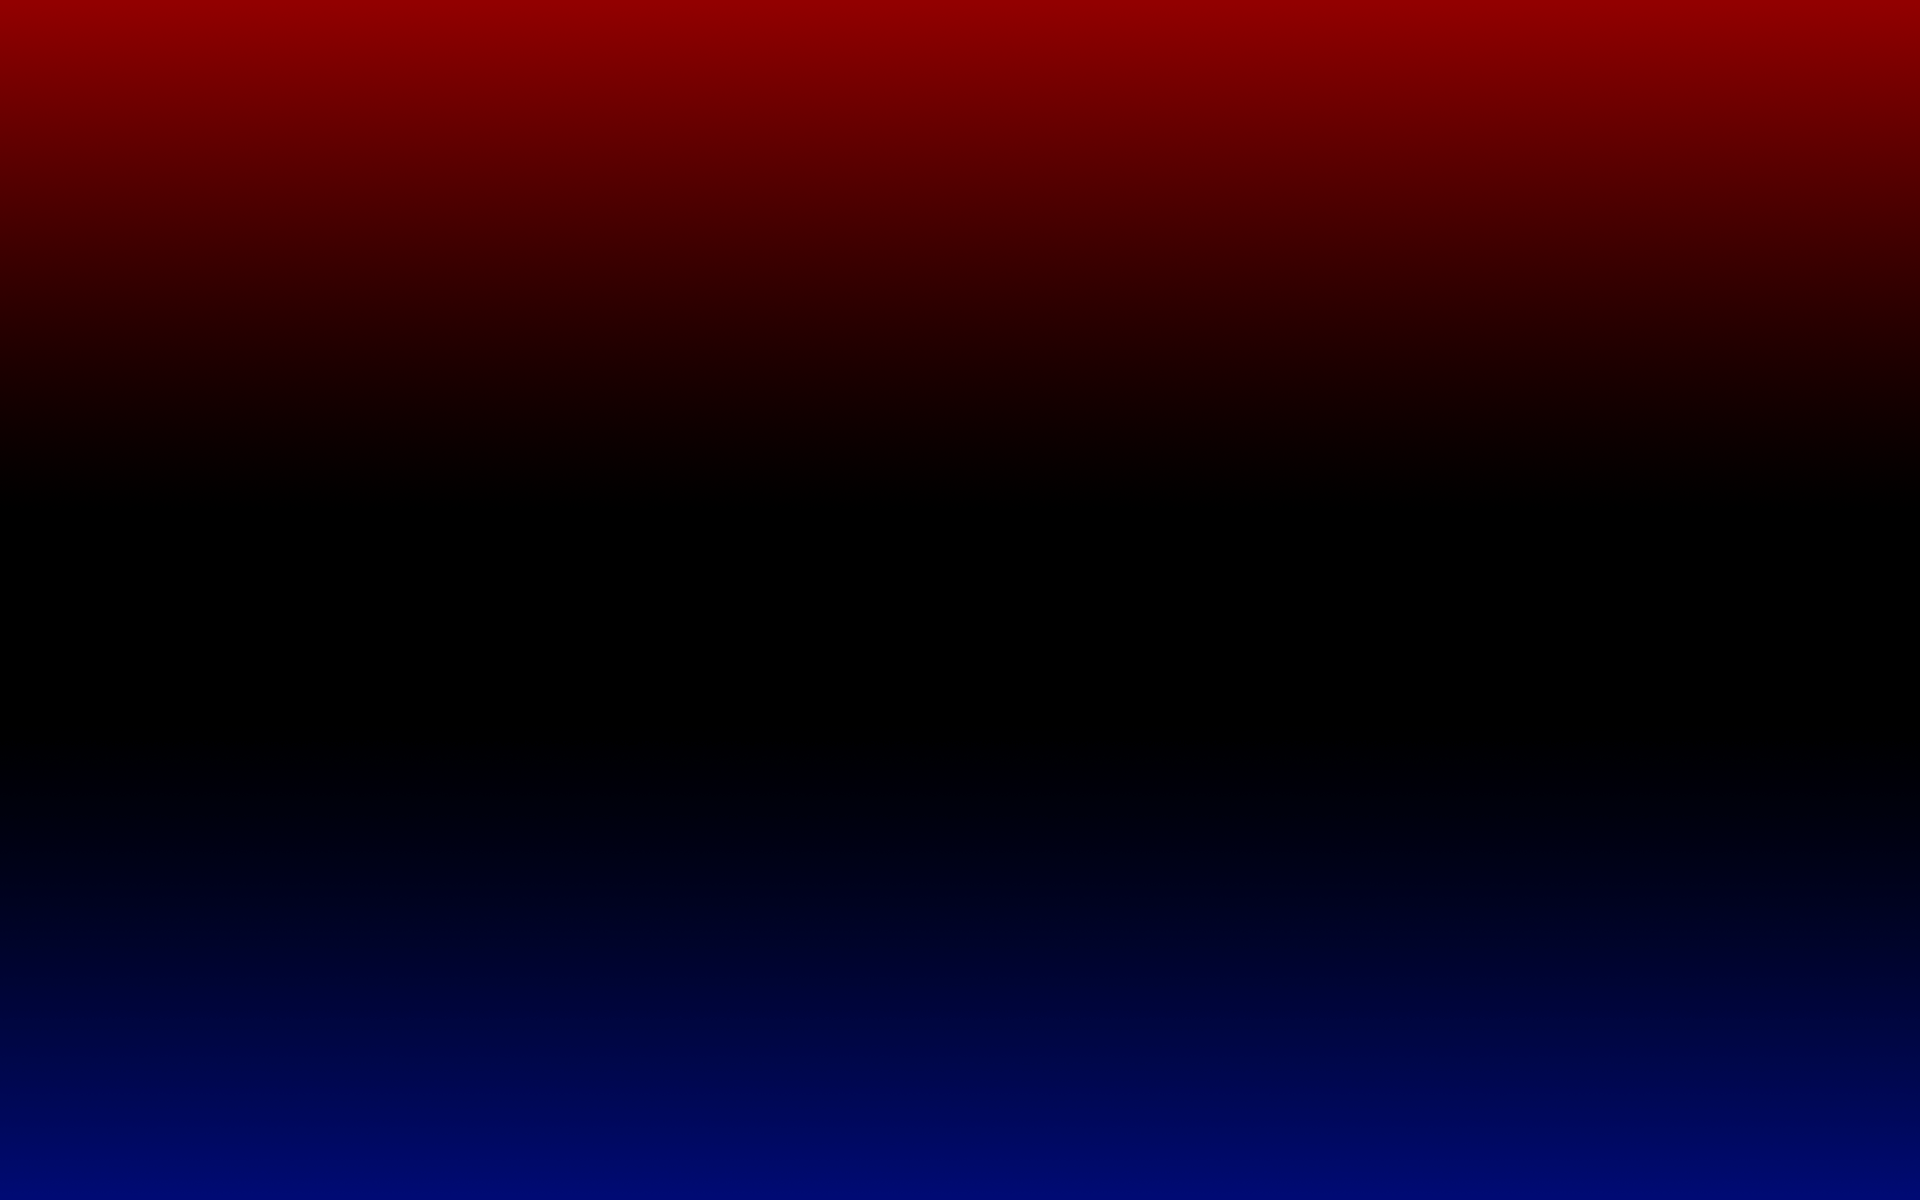 Black Red Blue Wallpapers - Top Free Black Red Blue Backgrounds ...